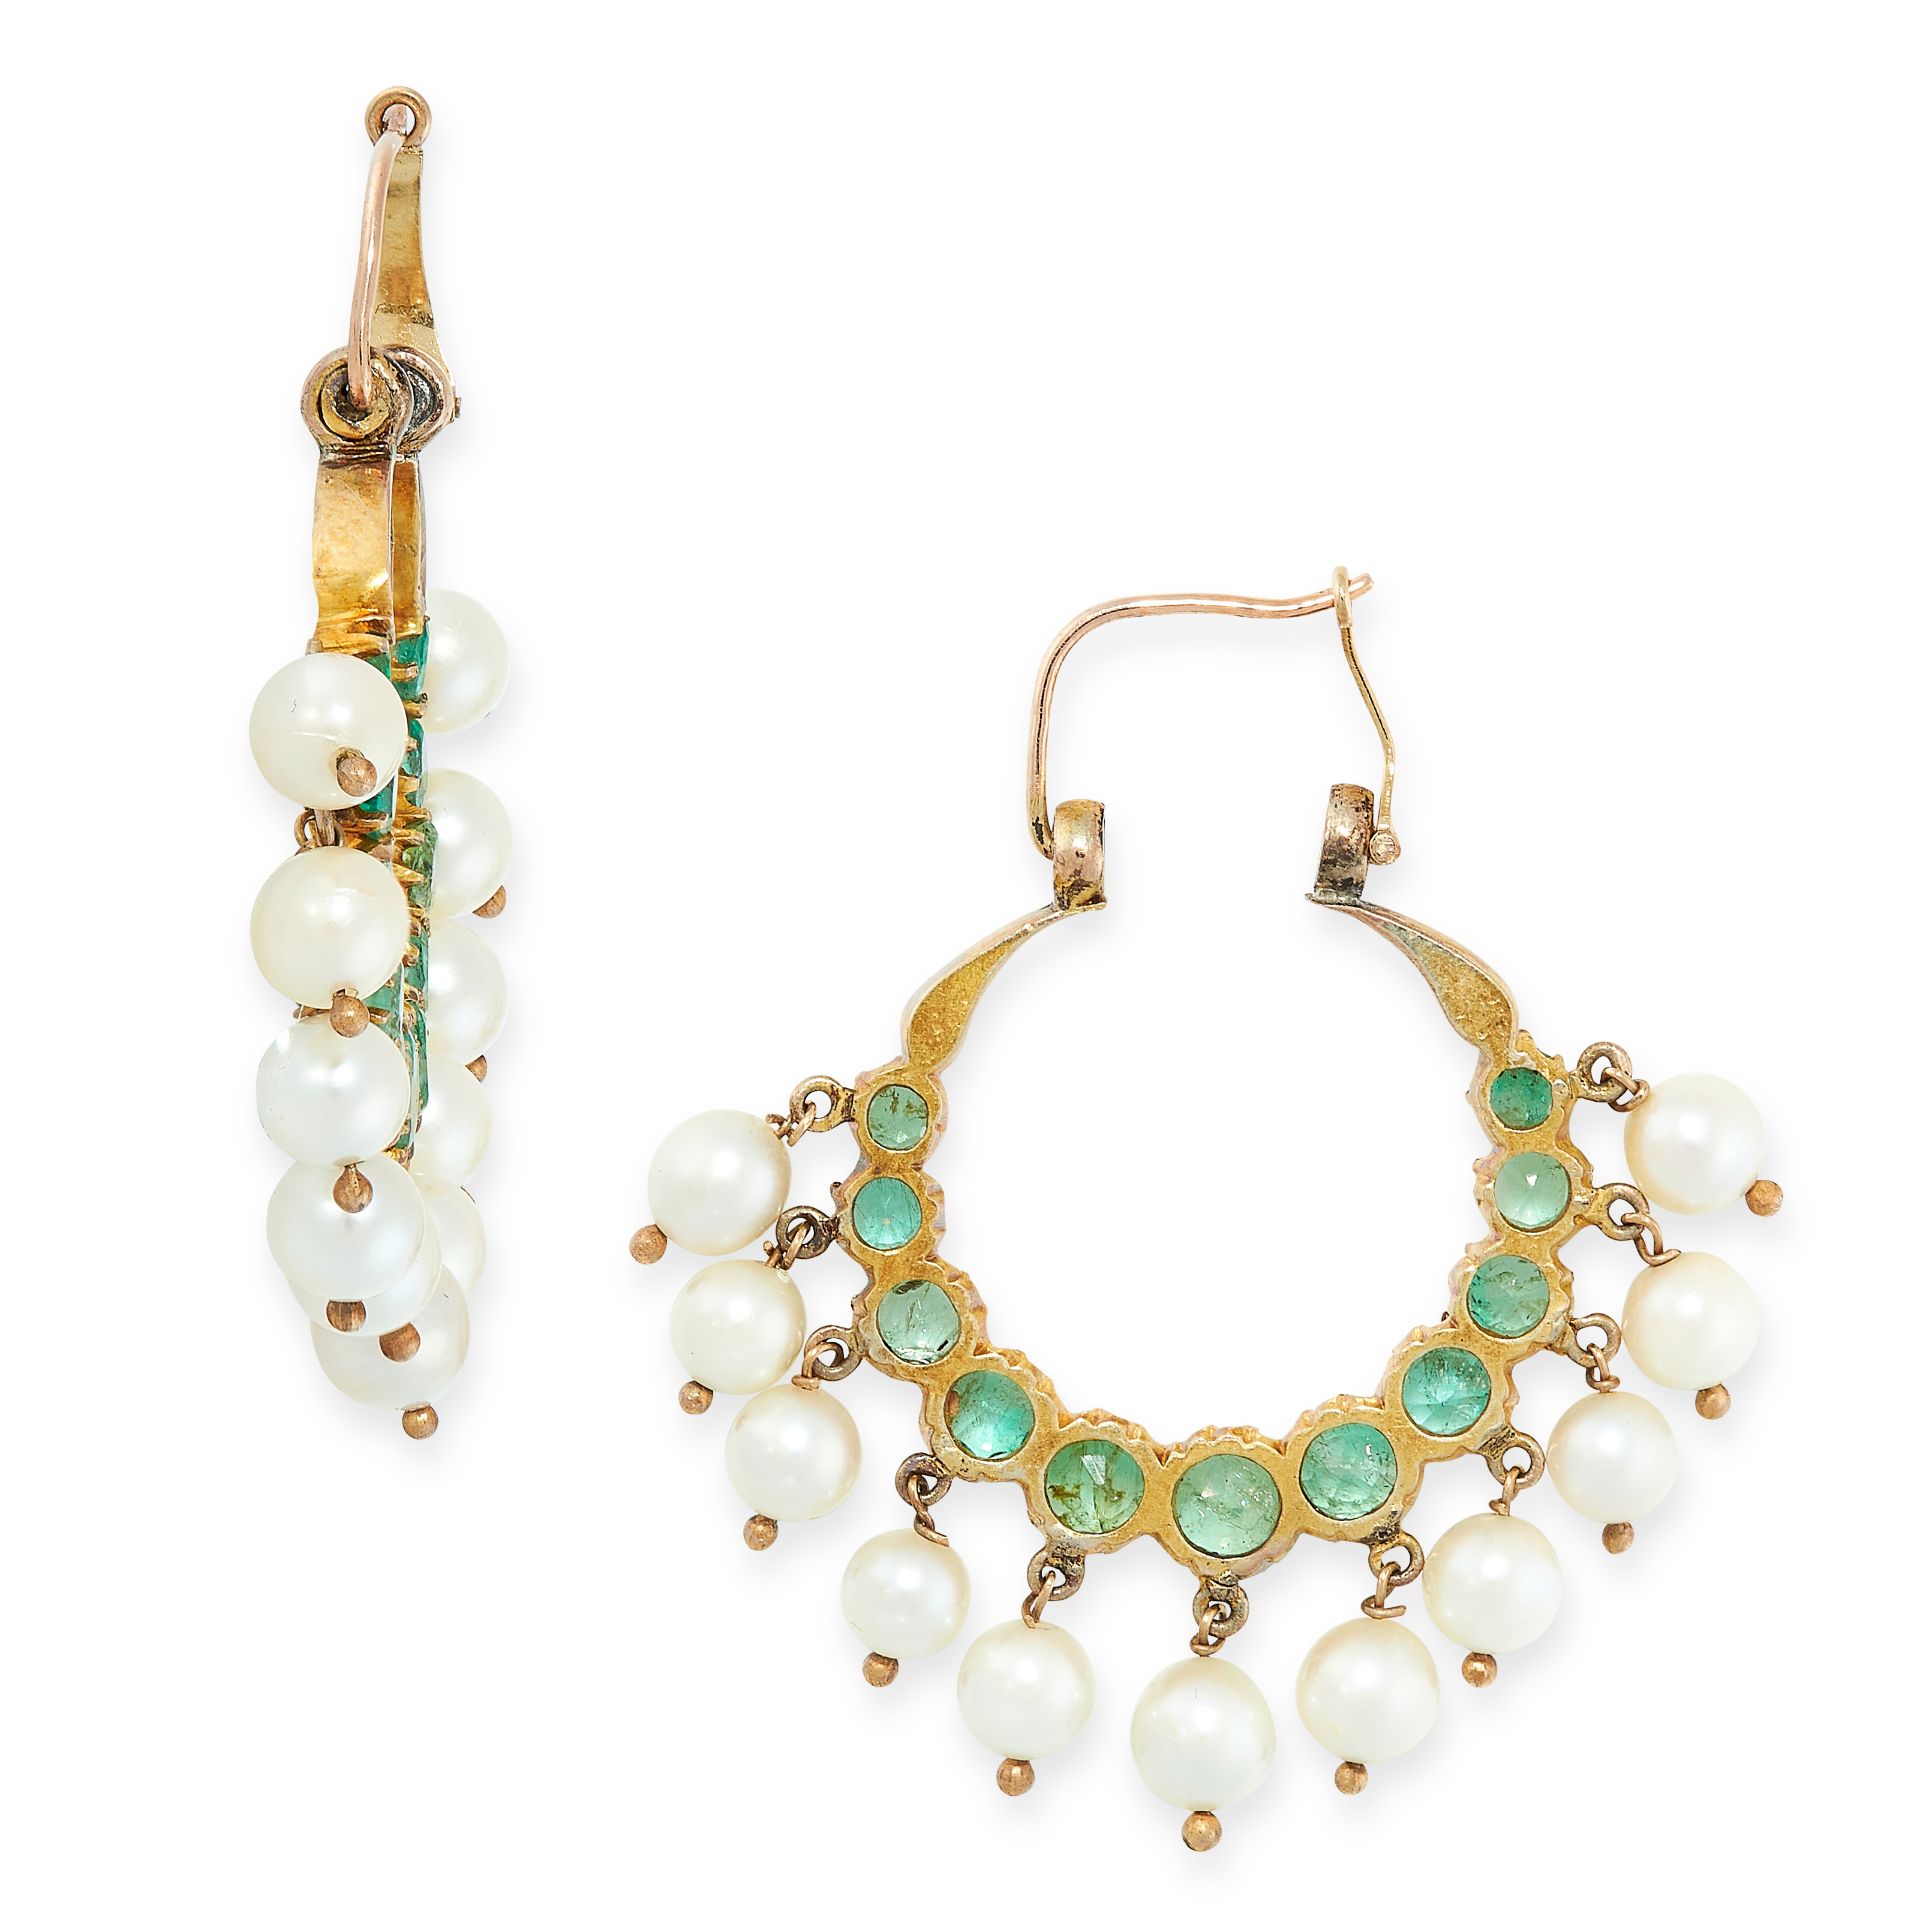 PAIR OF EMERALD AND PEARL EARRINGS each of hoop design, set with circular-cut emeralds and - Image 2 of 2